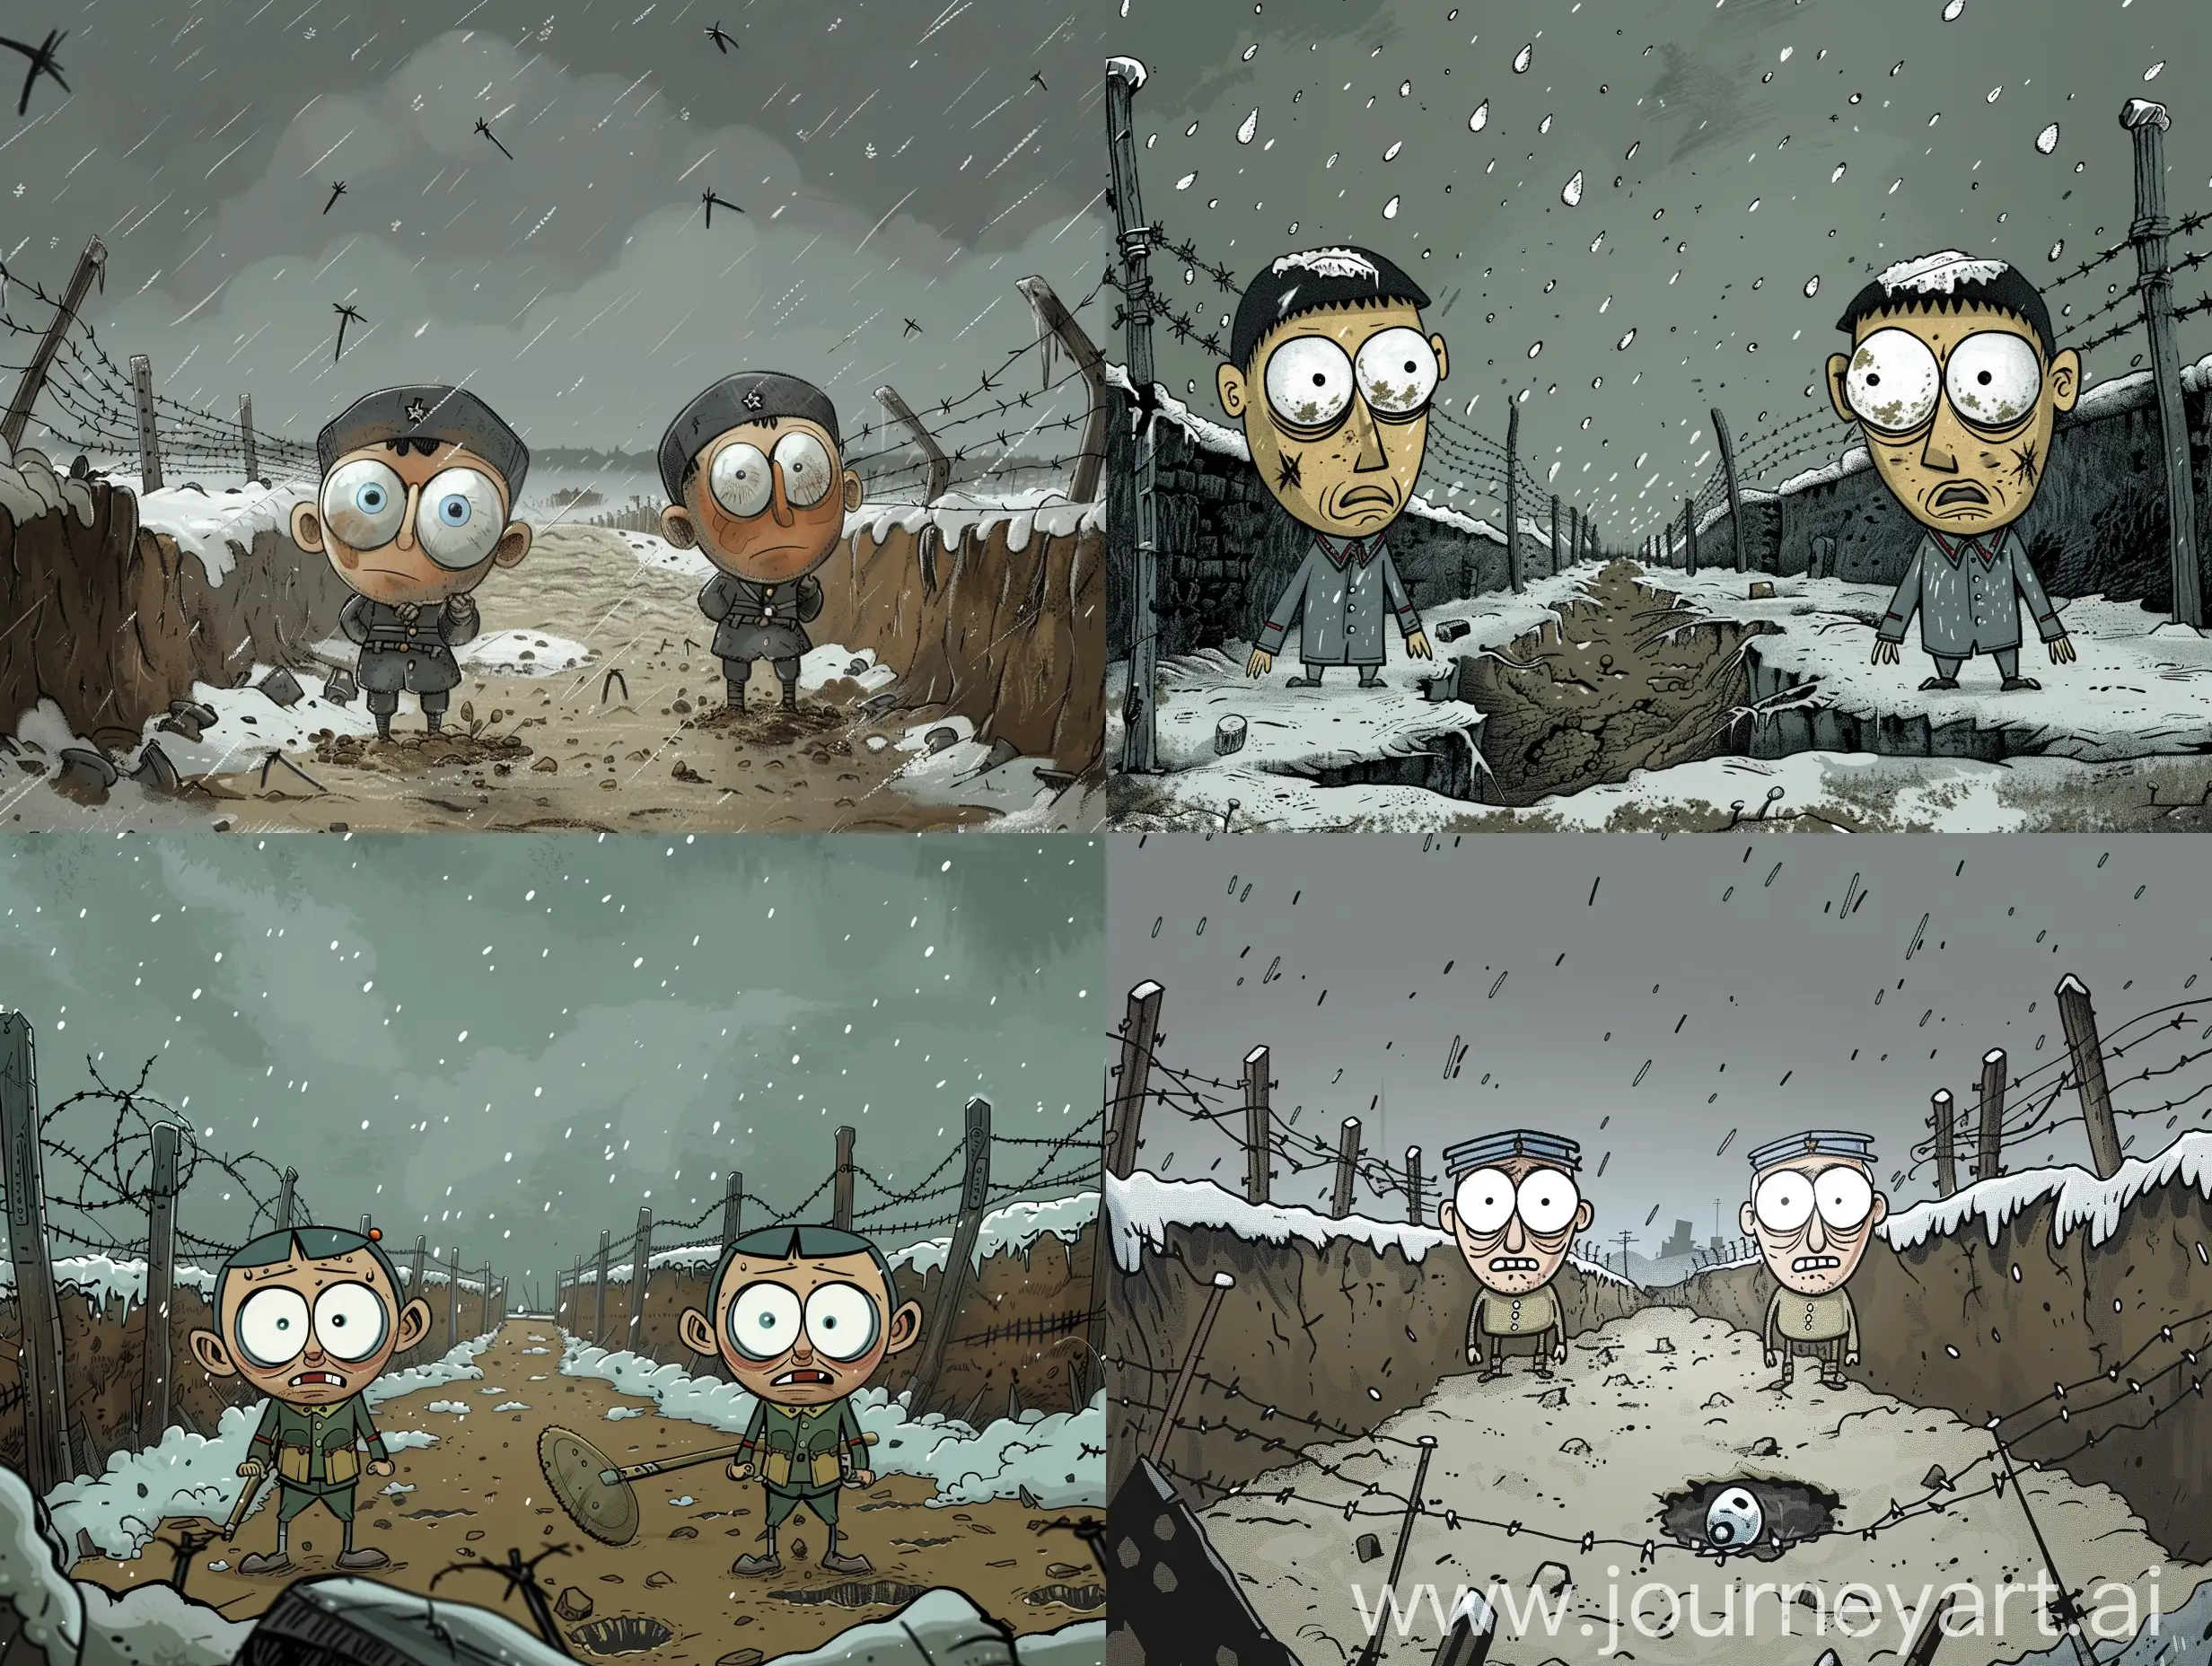 Cartoon characters, two Napoleons wander through the snow from Russia, two characters, big eyes, look around, cartoon style, comics style, mud, grey sky, dark, gloomy, barbed wire, trenches